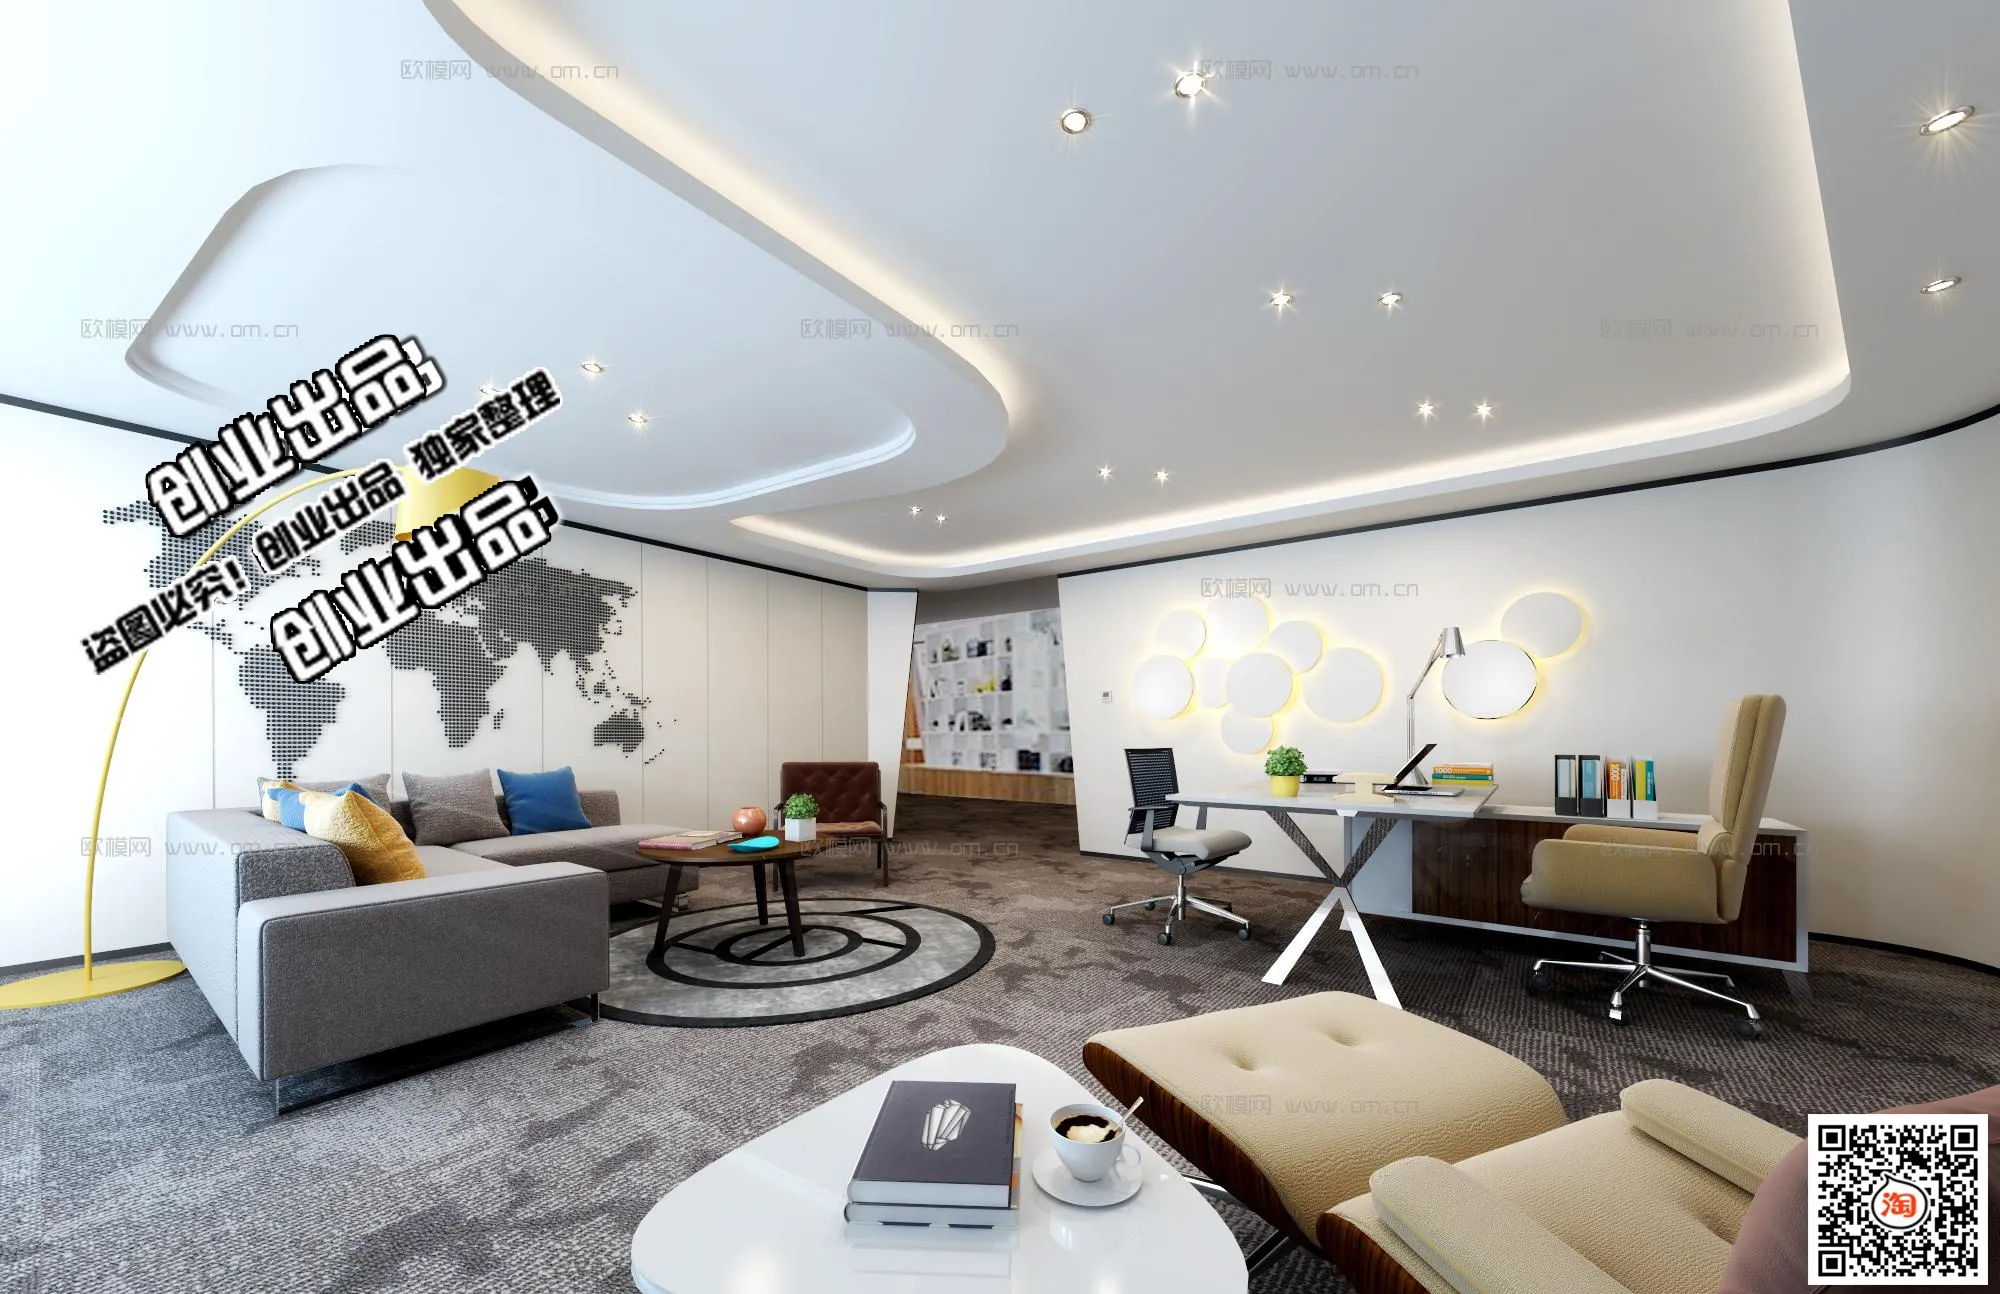 3D OFFICE INTERIOR (VRAY) – MANAGER ROOM 3D SCENES – 040